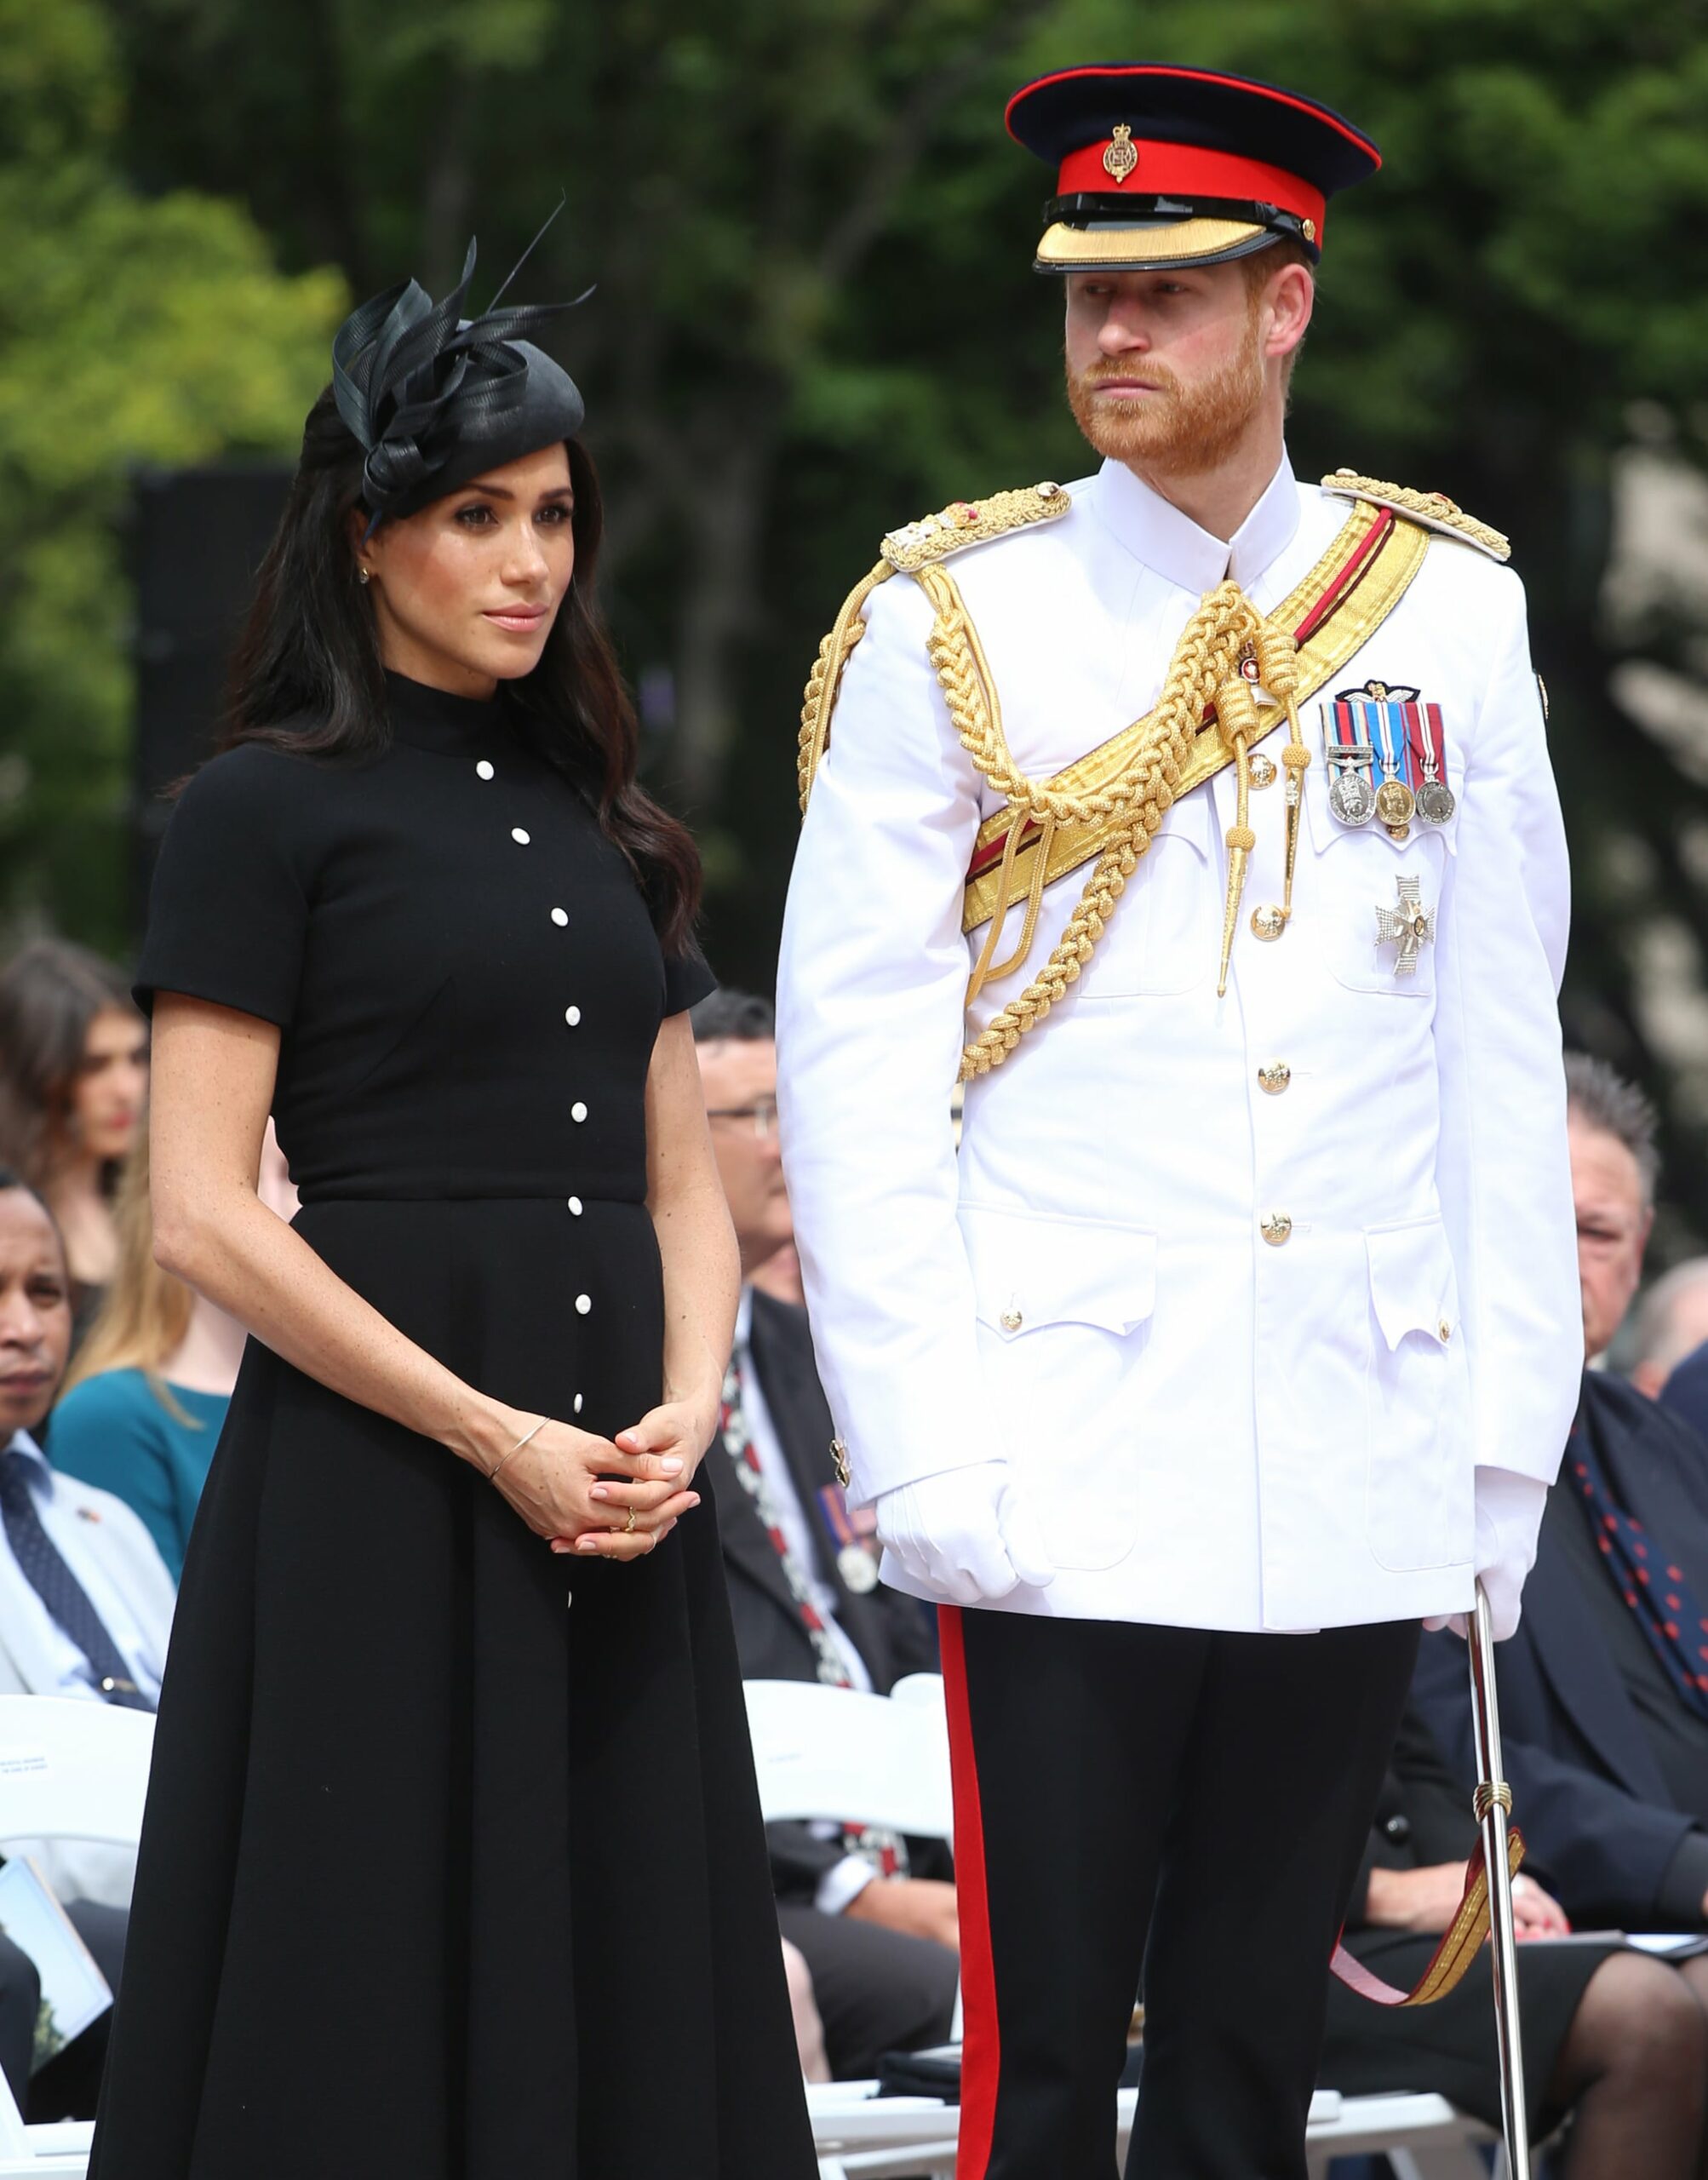 Will Harry and Meghan Attend Prince Philip's Funeral?